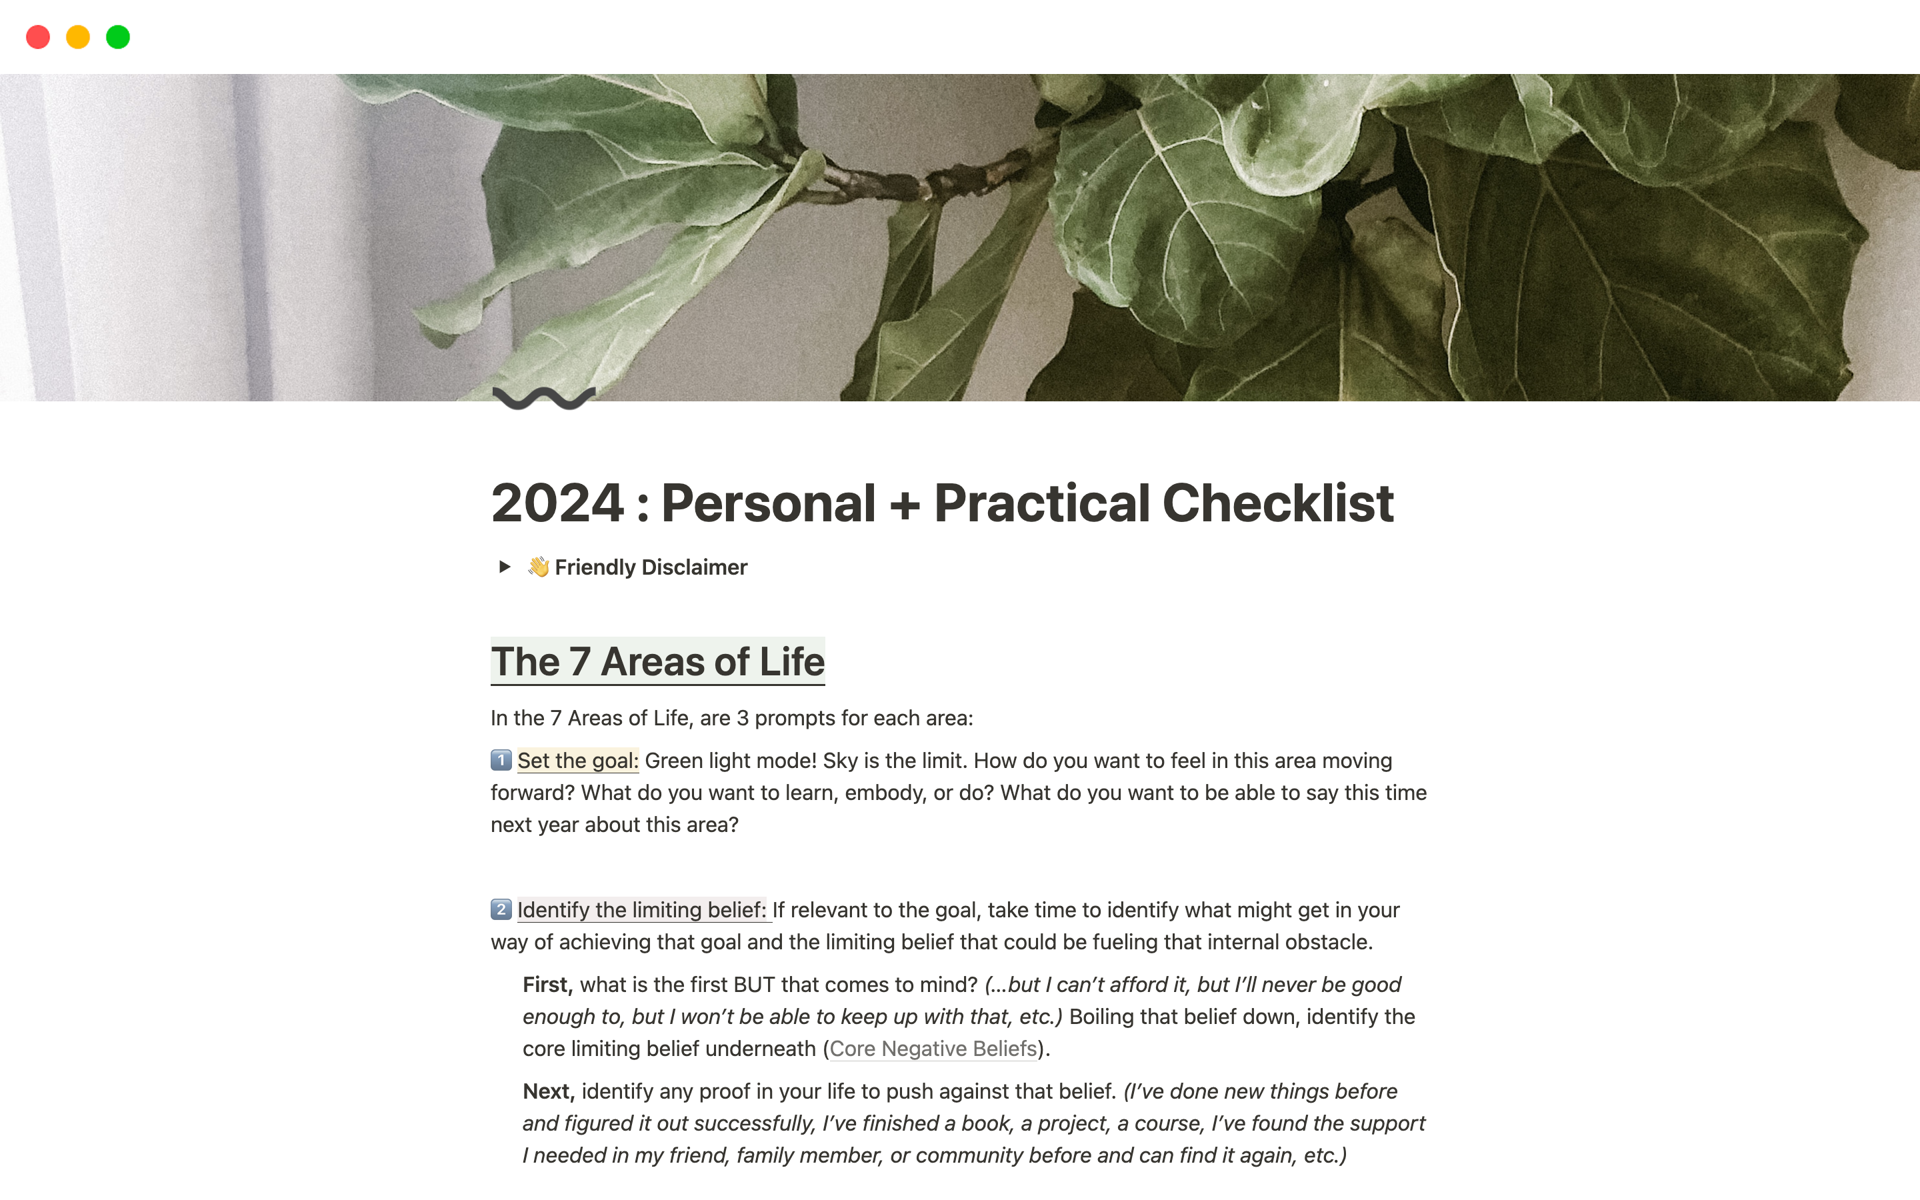 An all-encompassing checklist for your personal goals and practical life. 